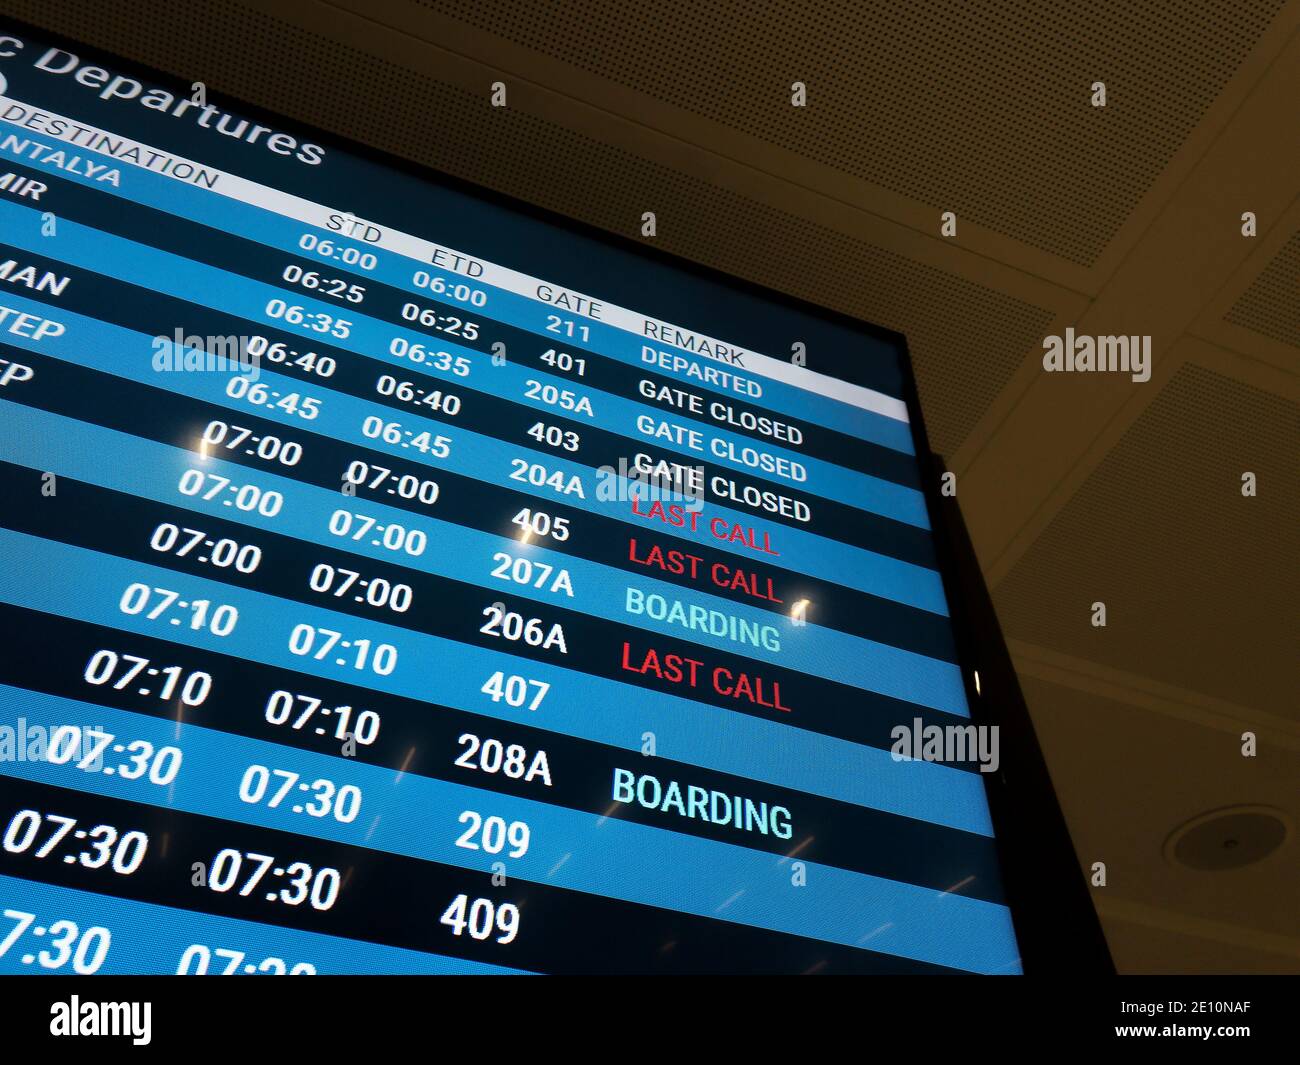 A blue digital screen at an airport announcing time and gate info for each flight. Messages are: LAST CALL, BOARDING and GATE CLOSED Stock Photo